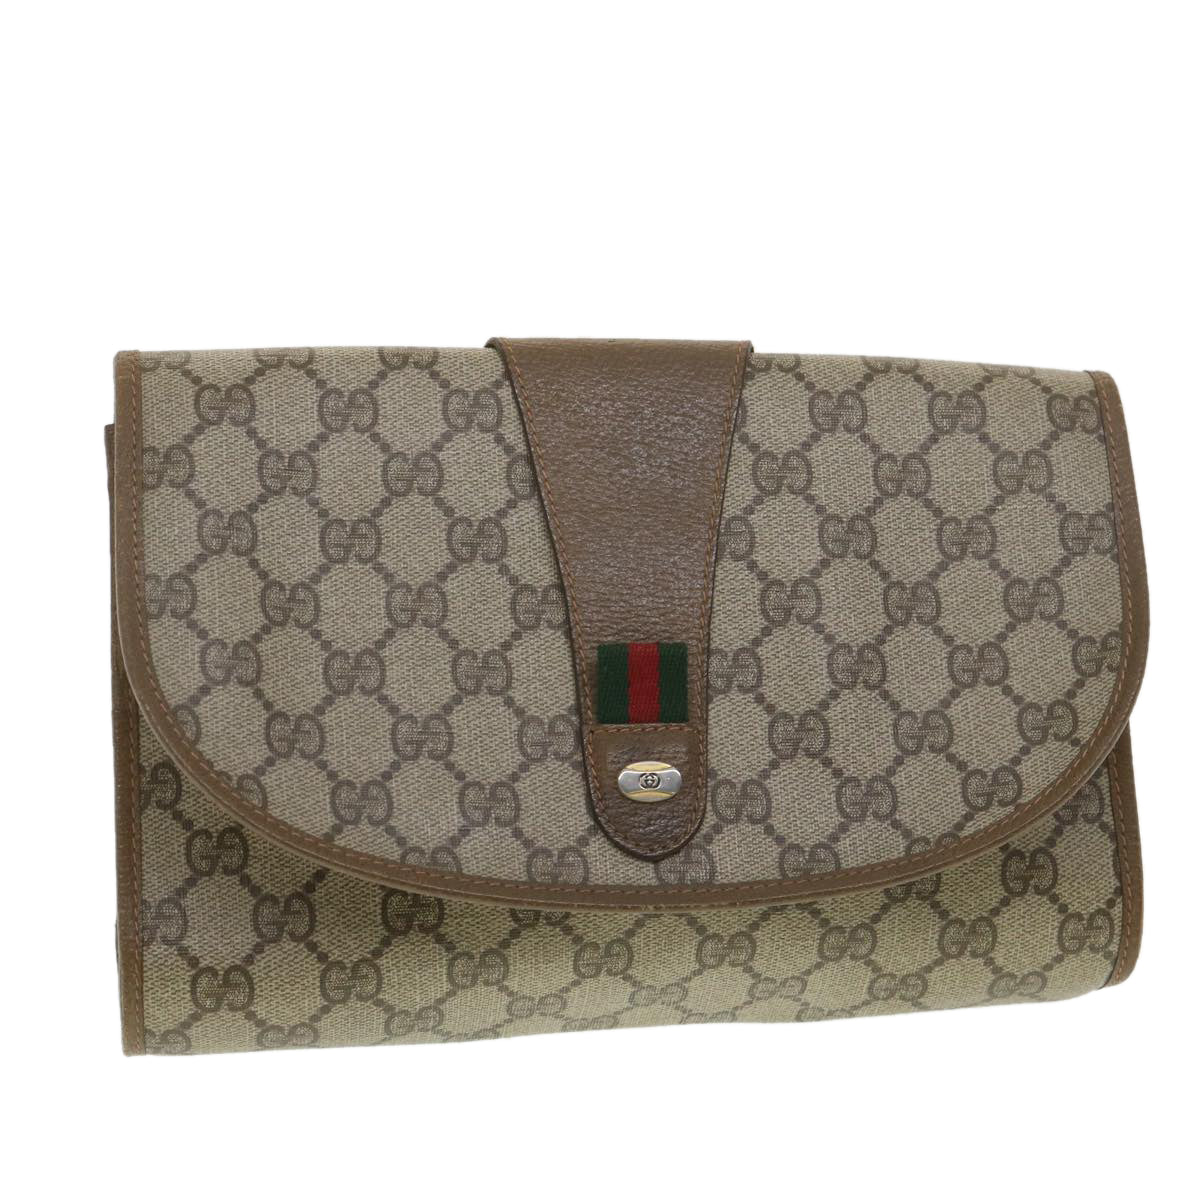 GUCCI GG Canvas Web Sherry Line Clutch Bag Beige Red Green 89.01.030 Auth ny215